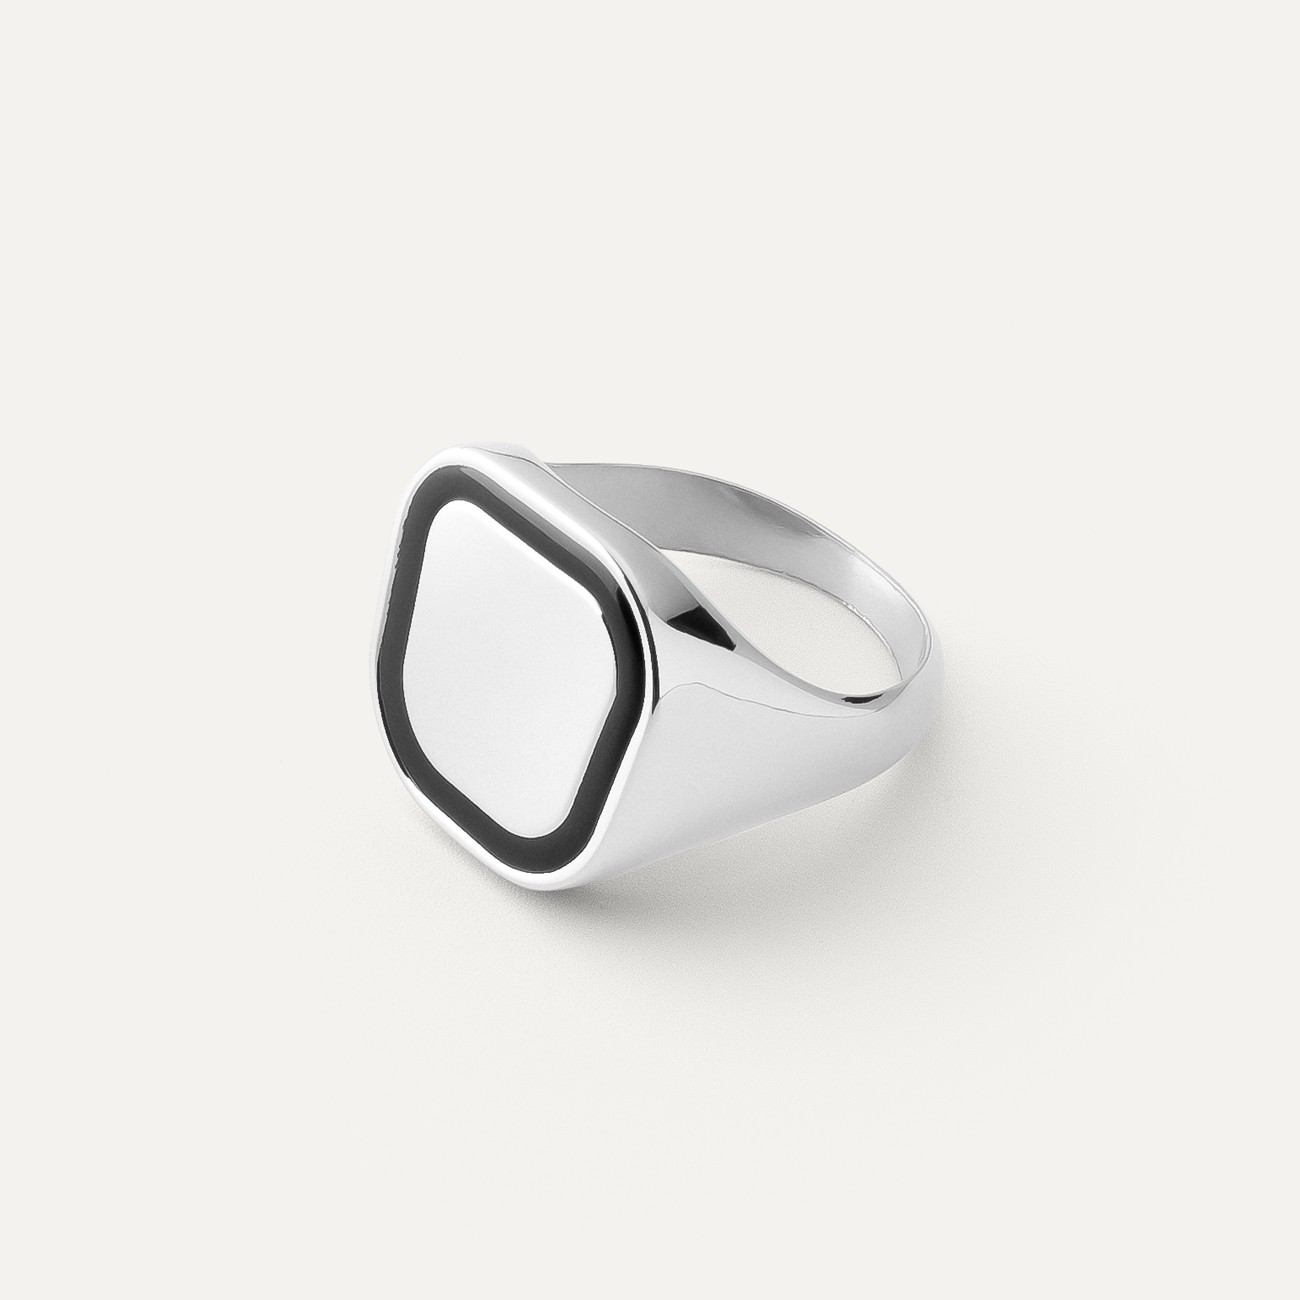 Square signet ring with black resin, sterling silver 925